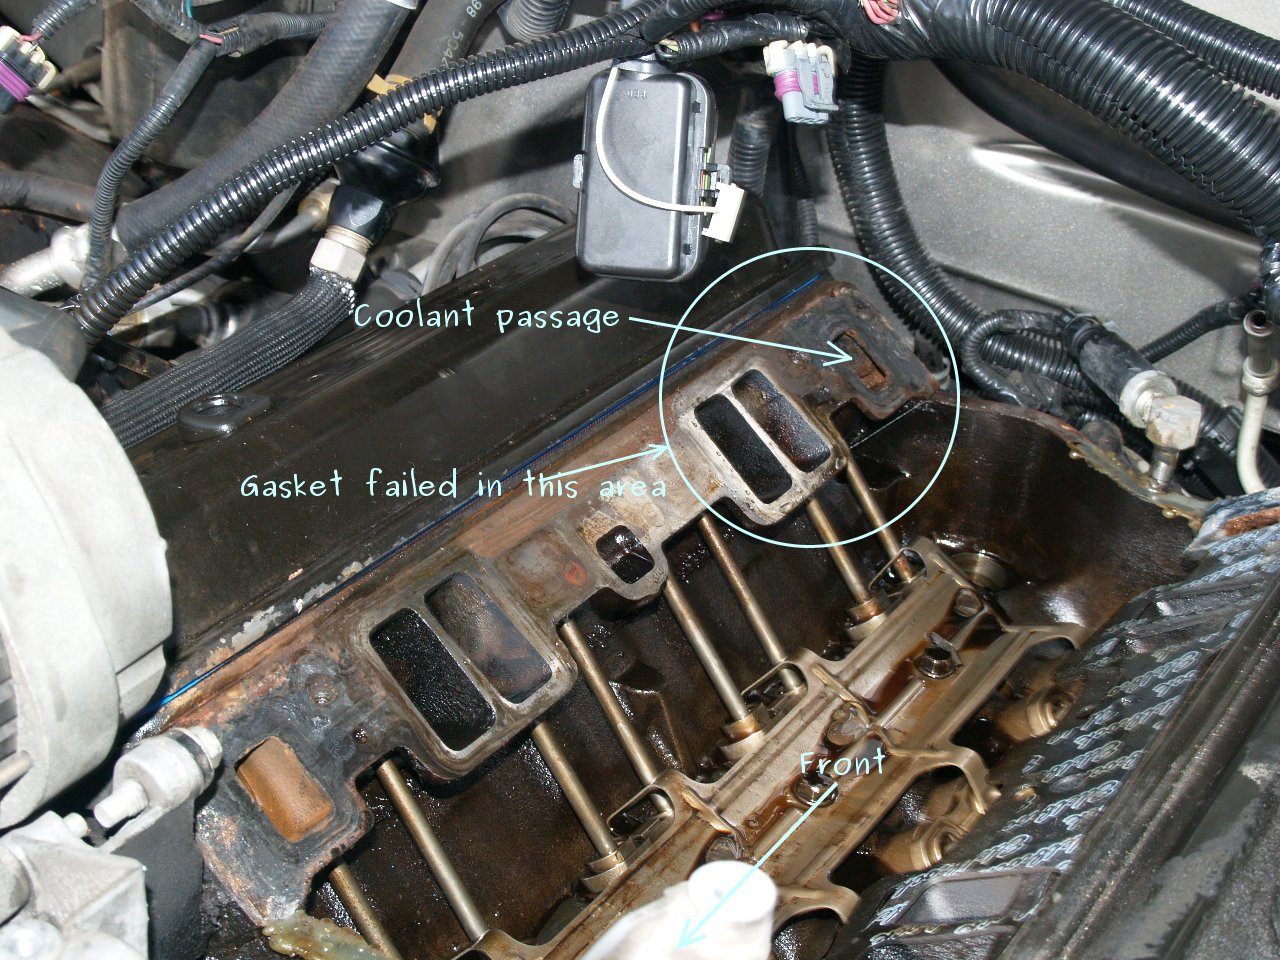 See P0B15 in engine